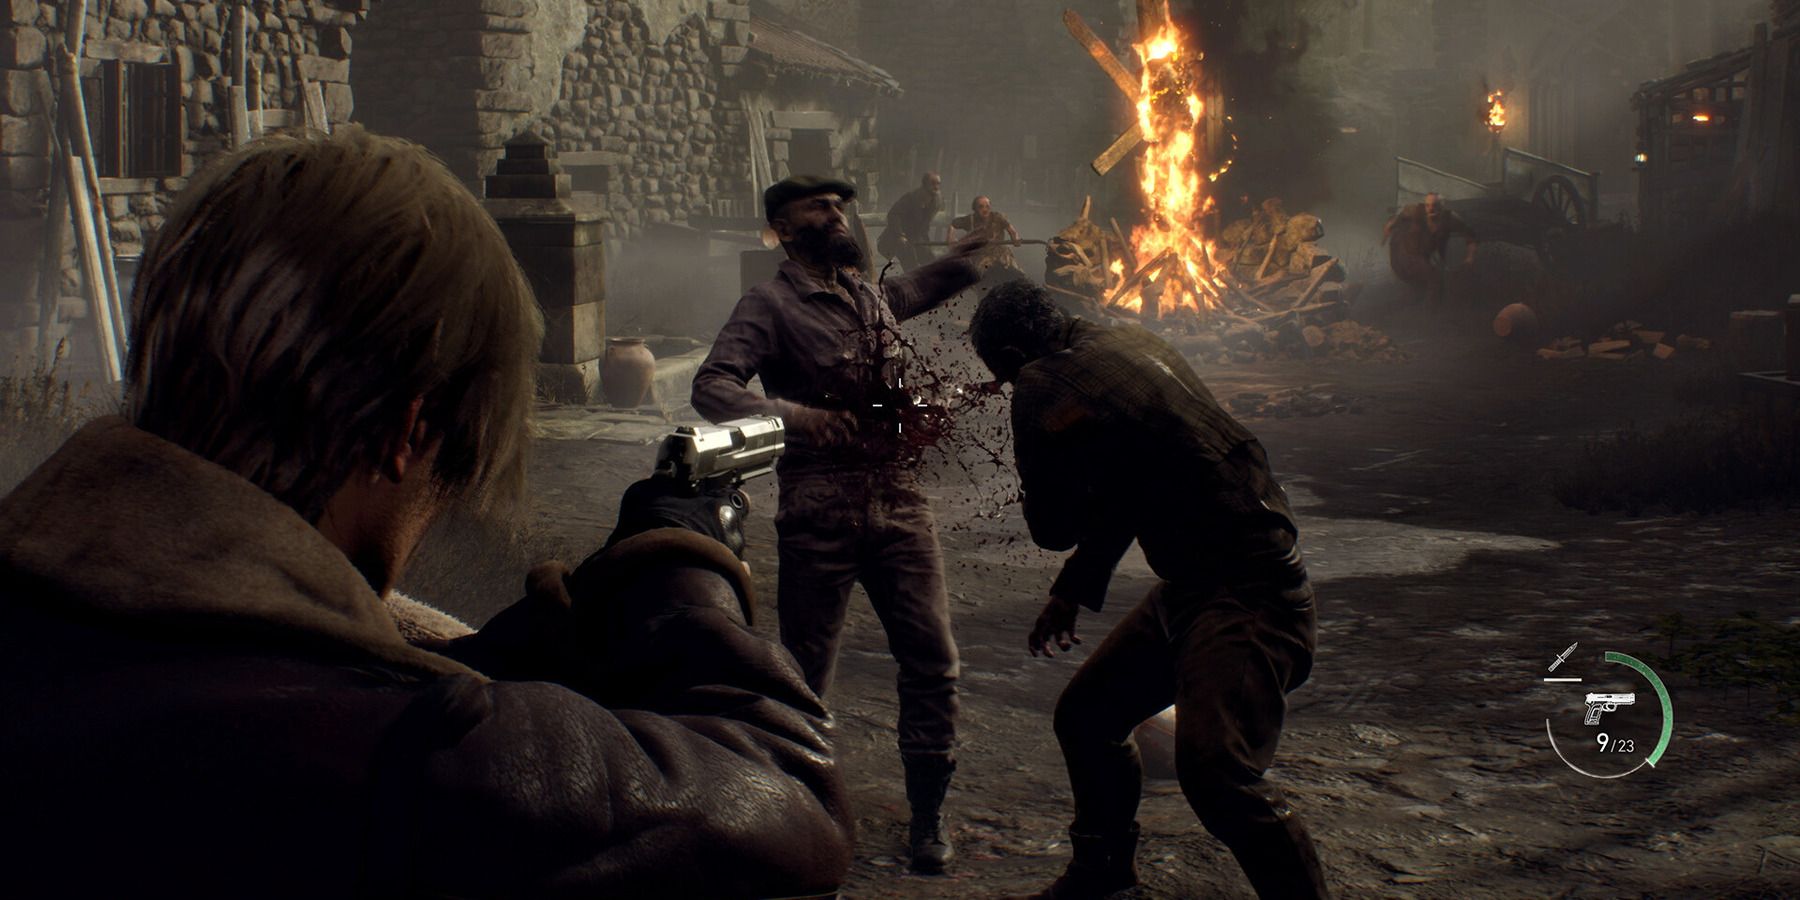 Resident Evil 4 Separate Ways DLC's Metacritic score is unveiled